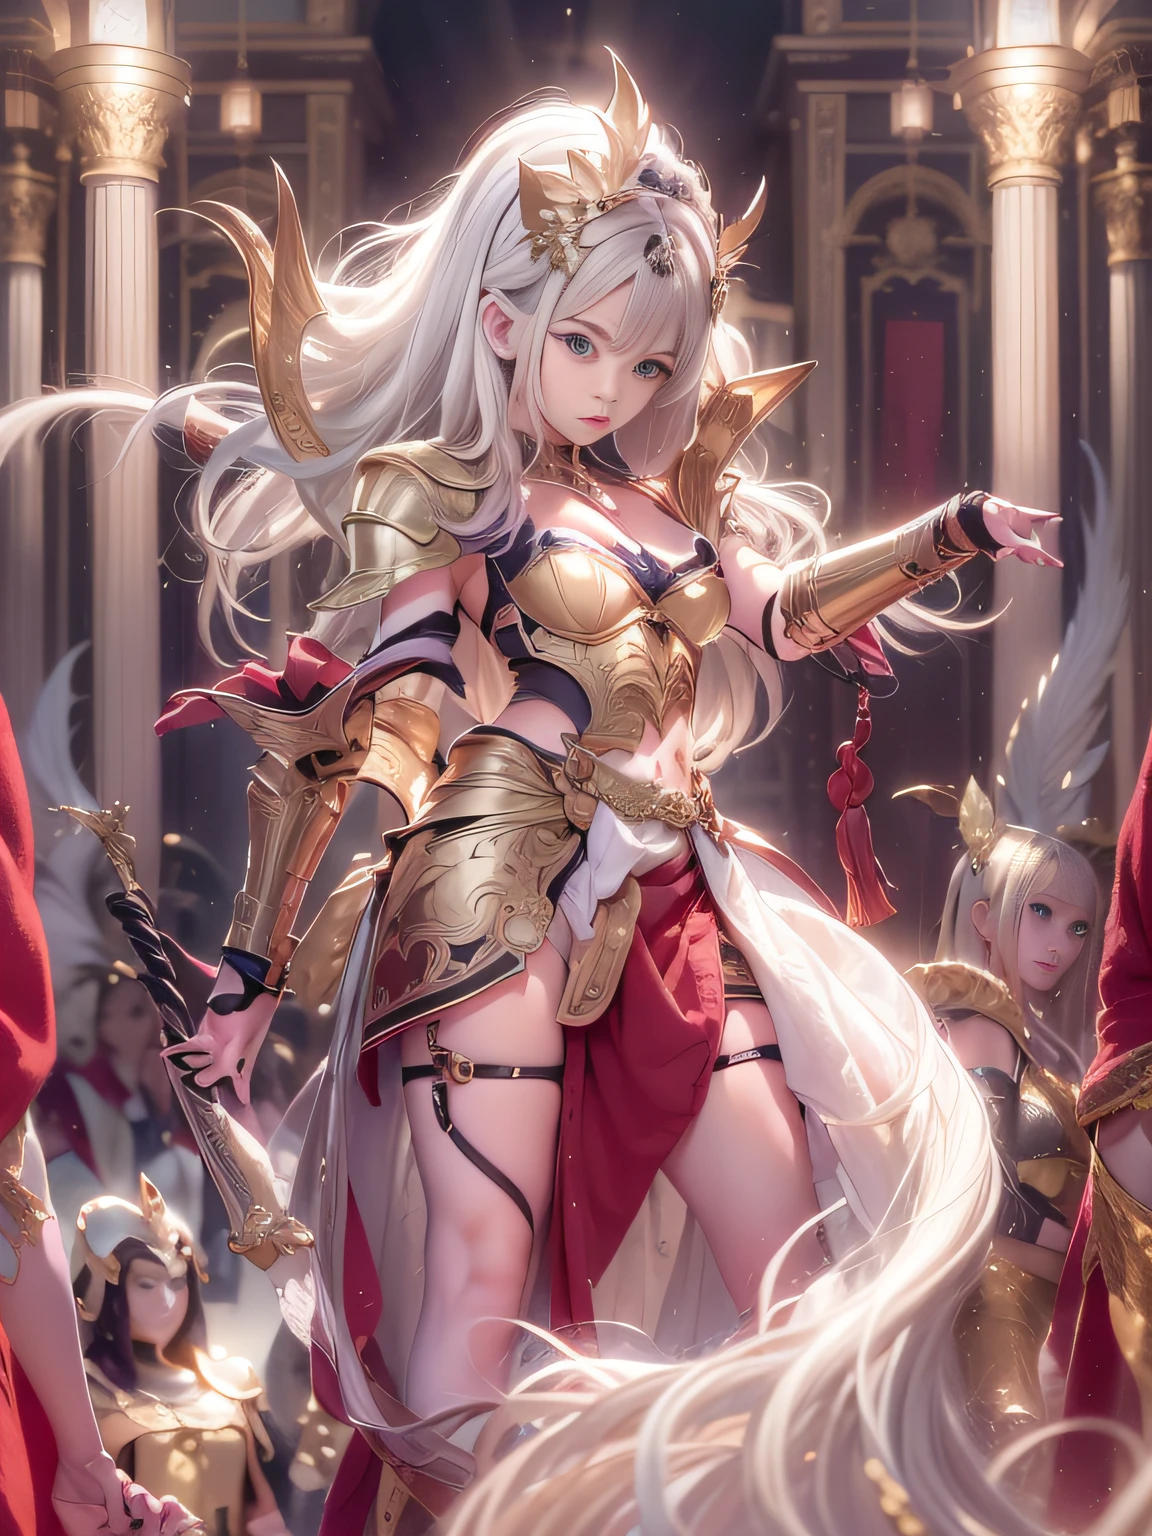 Highly detailed background，Realistic，ultra-detailliert，super detailed skin，Detailed beautiful face and eyes，retinas, masutepiece, ccurate, Anatomically correct, Textured skin, Super Detail, high details, High quality, awardwinning, Best Quality, hight resolution, 8K,Mysterious woman in white and red costume holds two-handed sword, knights of zodiac girl, portrait knights of zodiac girl,lady palutena,smooth hair，detailed hairs，Very fine hairs,,Thin leg, Wearing underwear，angelic golden armor, gilded shiny armour, Ornate white and gold armor, heavy white and golden armor, Intricate red and white and gold armor, Shimmering red and copper armor, wearing shining armor, gold armour, Princess Knight, golden armour, Great studded lights、Delicate and beautiful colors、Have an emotional atmosphere、Transparent background、Have a fantastic and charming atmosphere，light glow，Film grain，Expro II，Lens Flare，Sharpen，cinematic shadow、There is a knight behind，Cool color makeup，Lowered eyebrows、Ephemeral Girl，A look tinged with joy